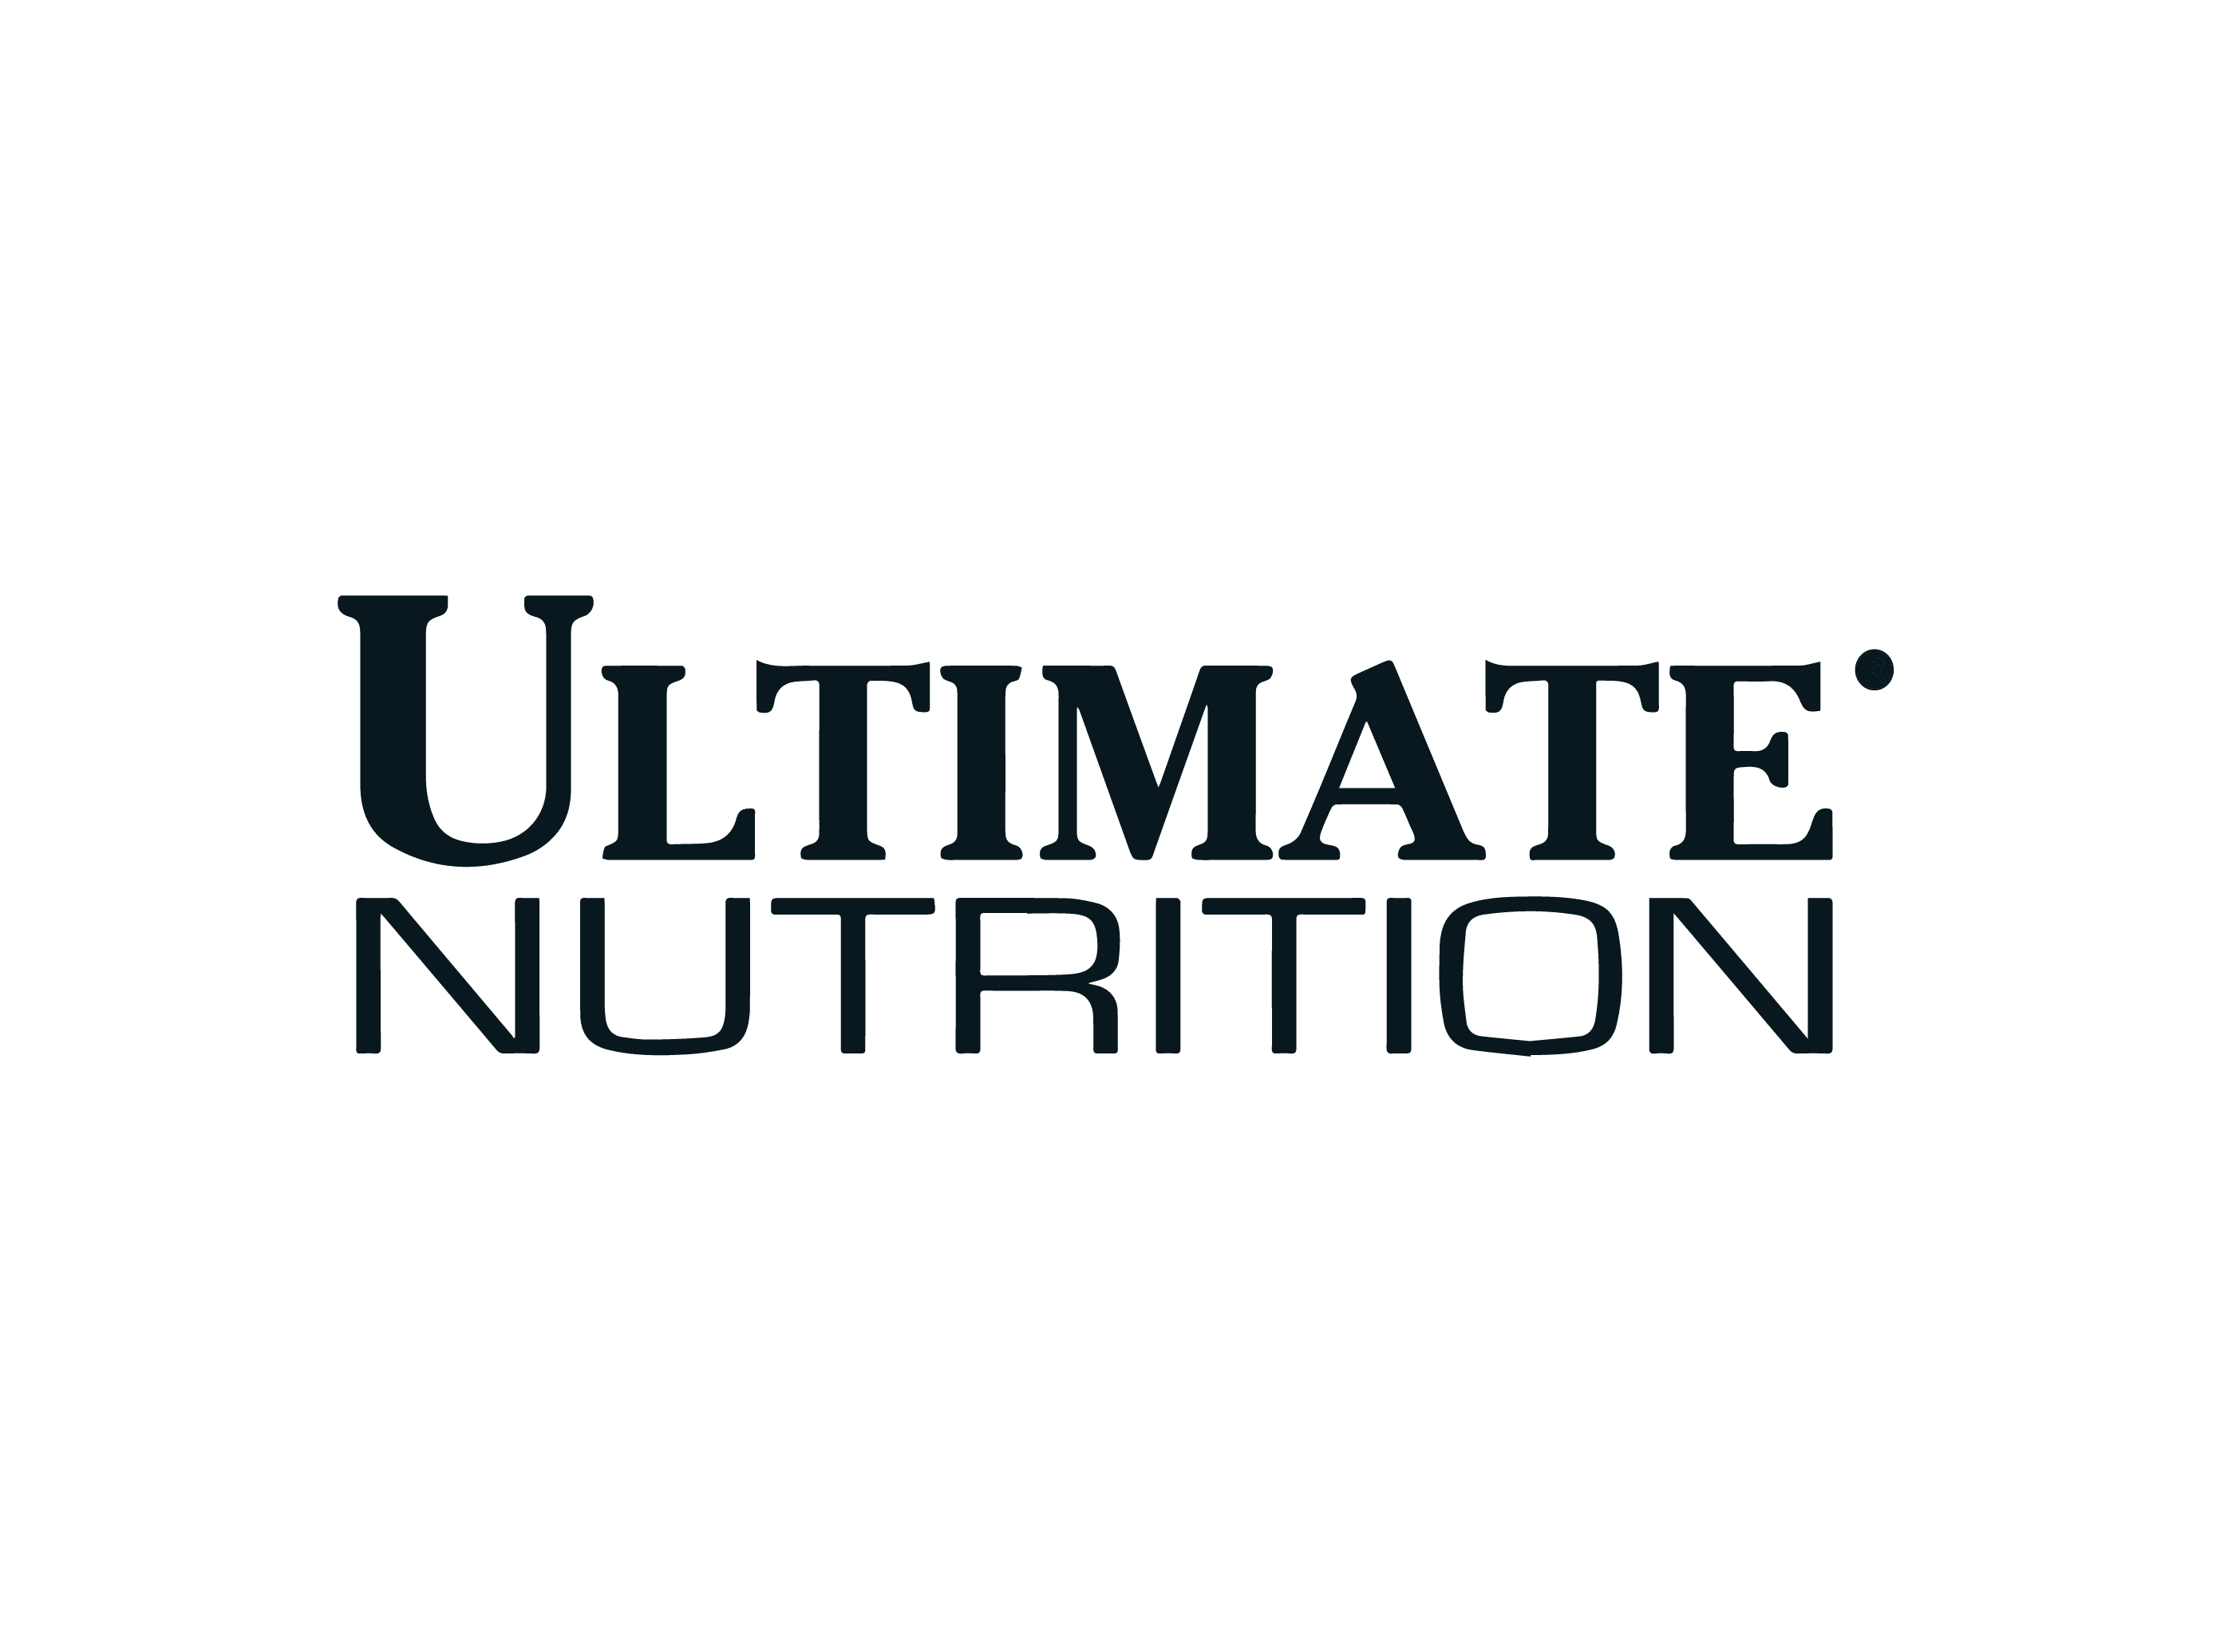 Ultimate Nutrition